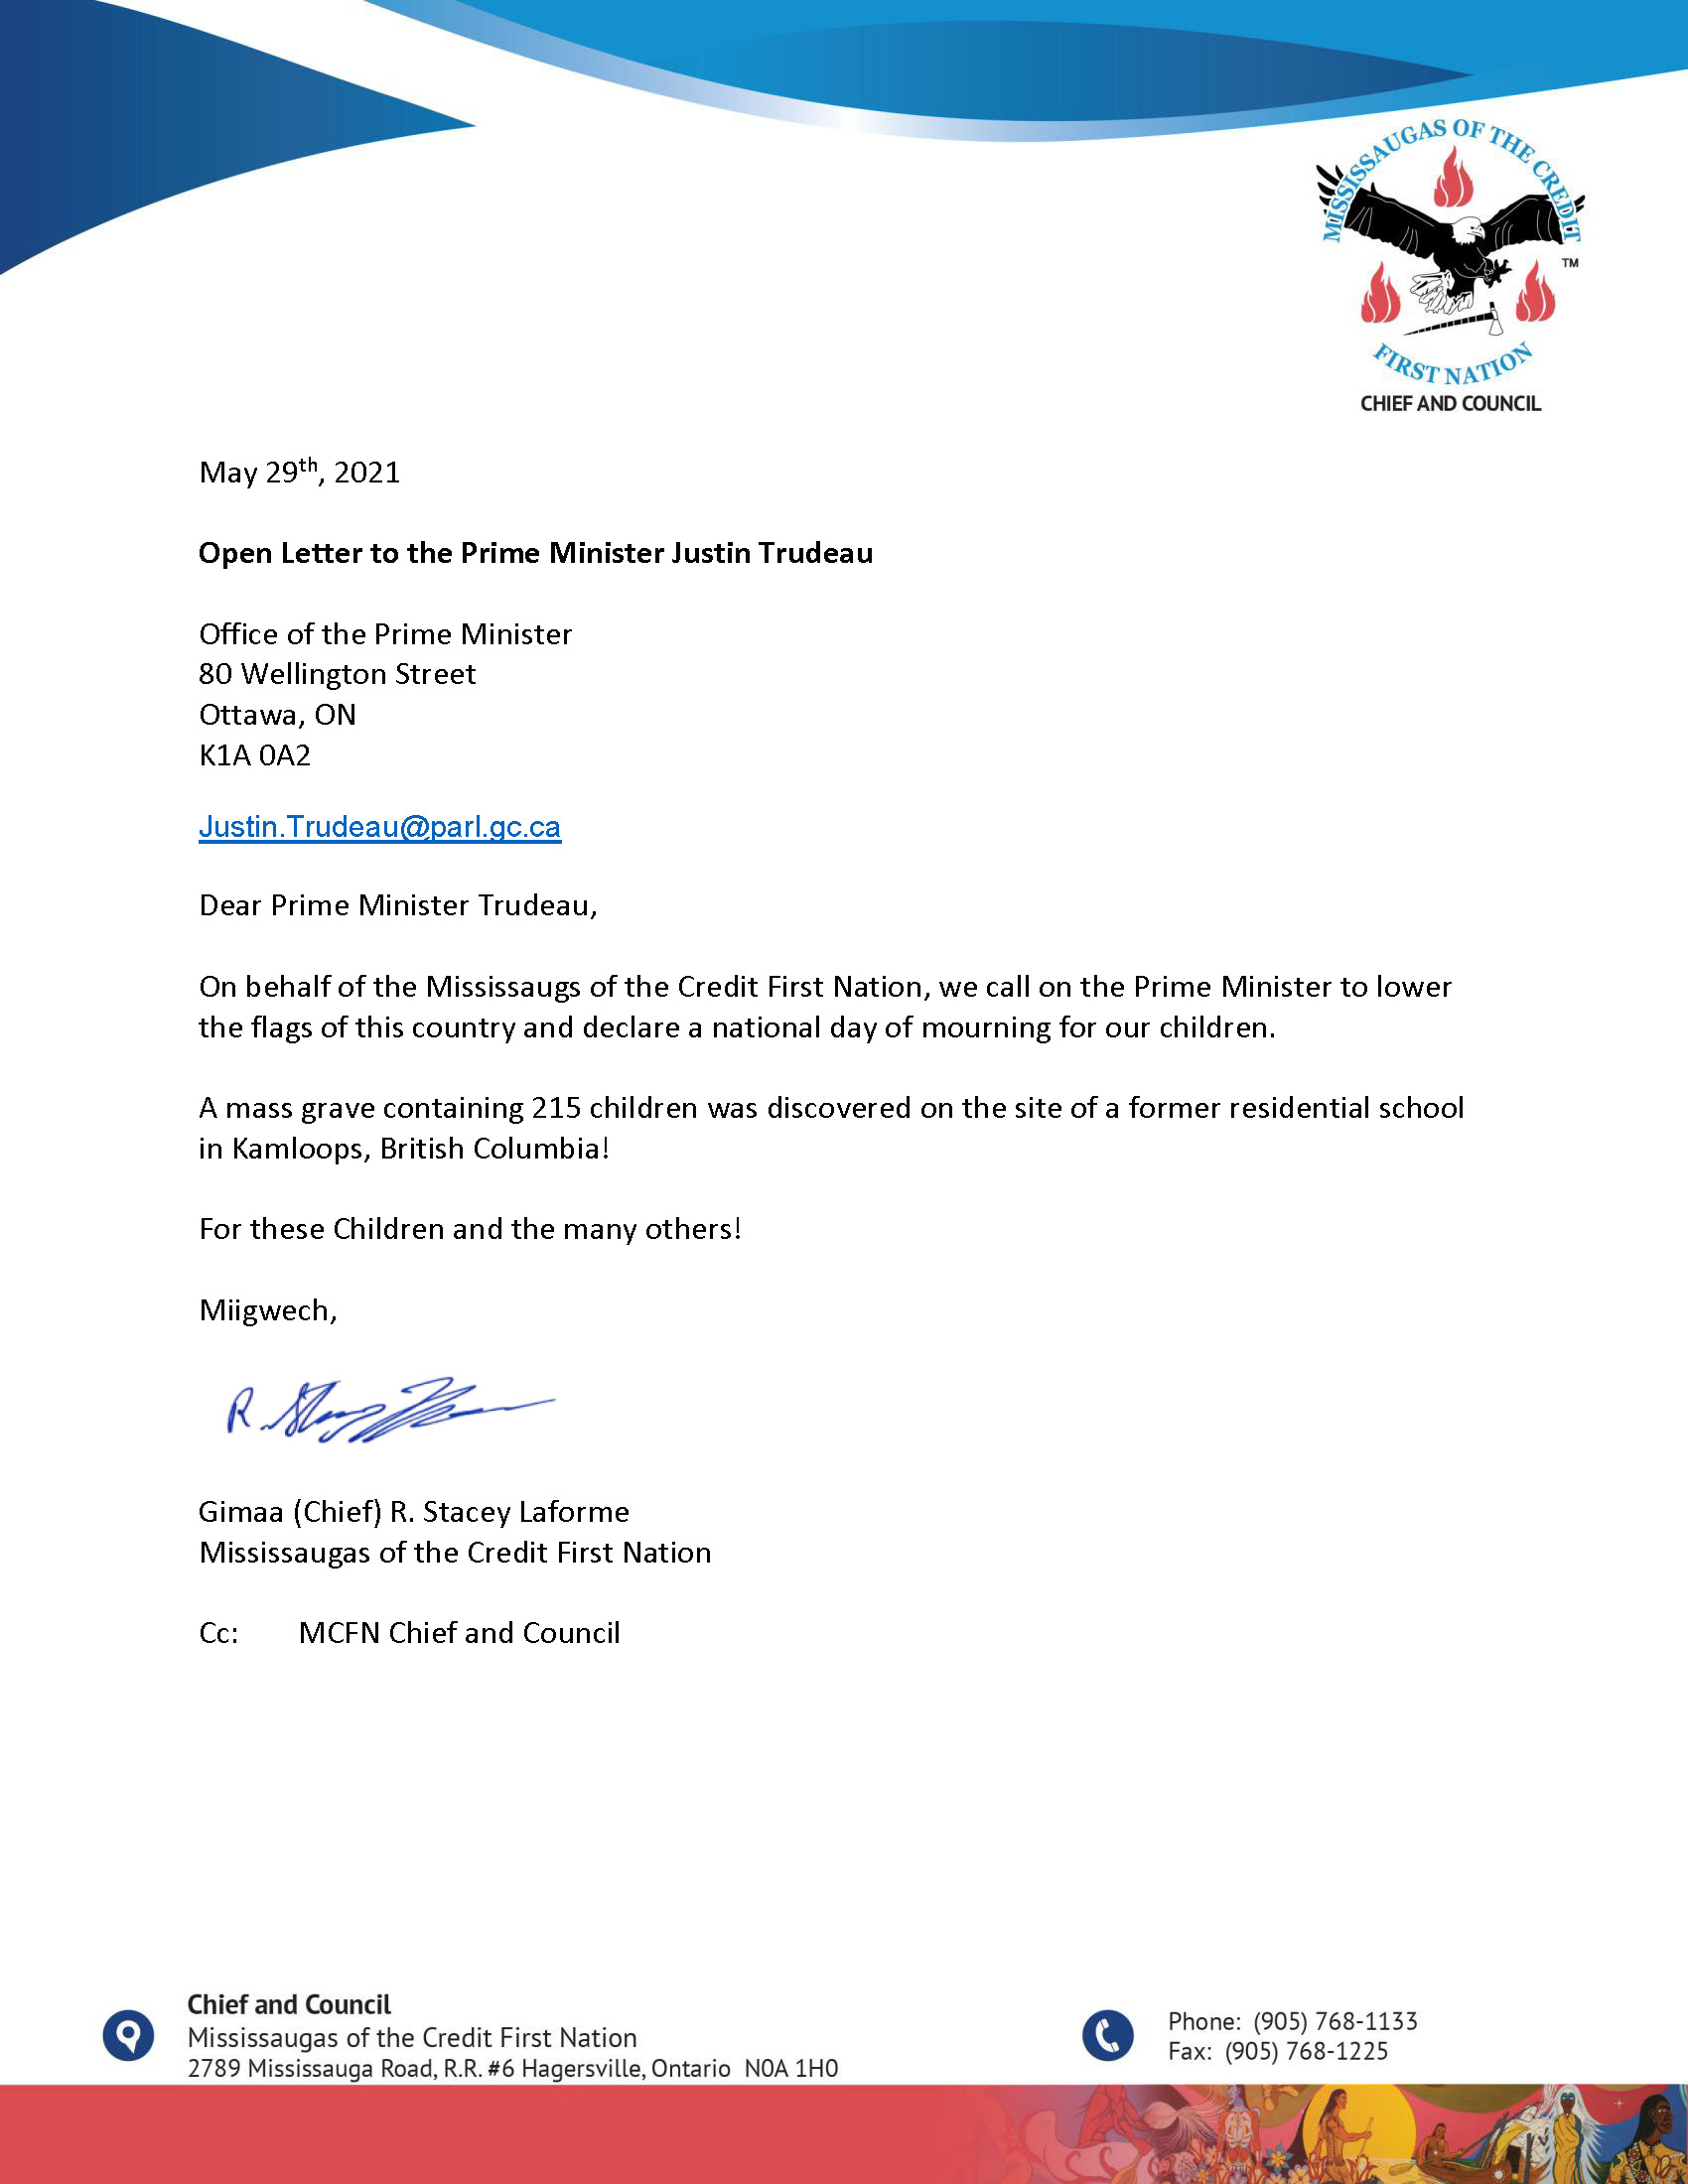 Open Letter to Prime Minister Trudeau regarding Kamloops, BC